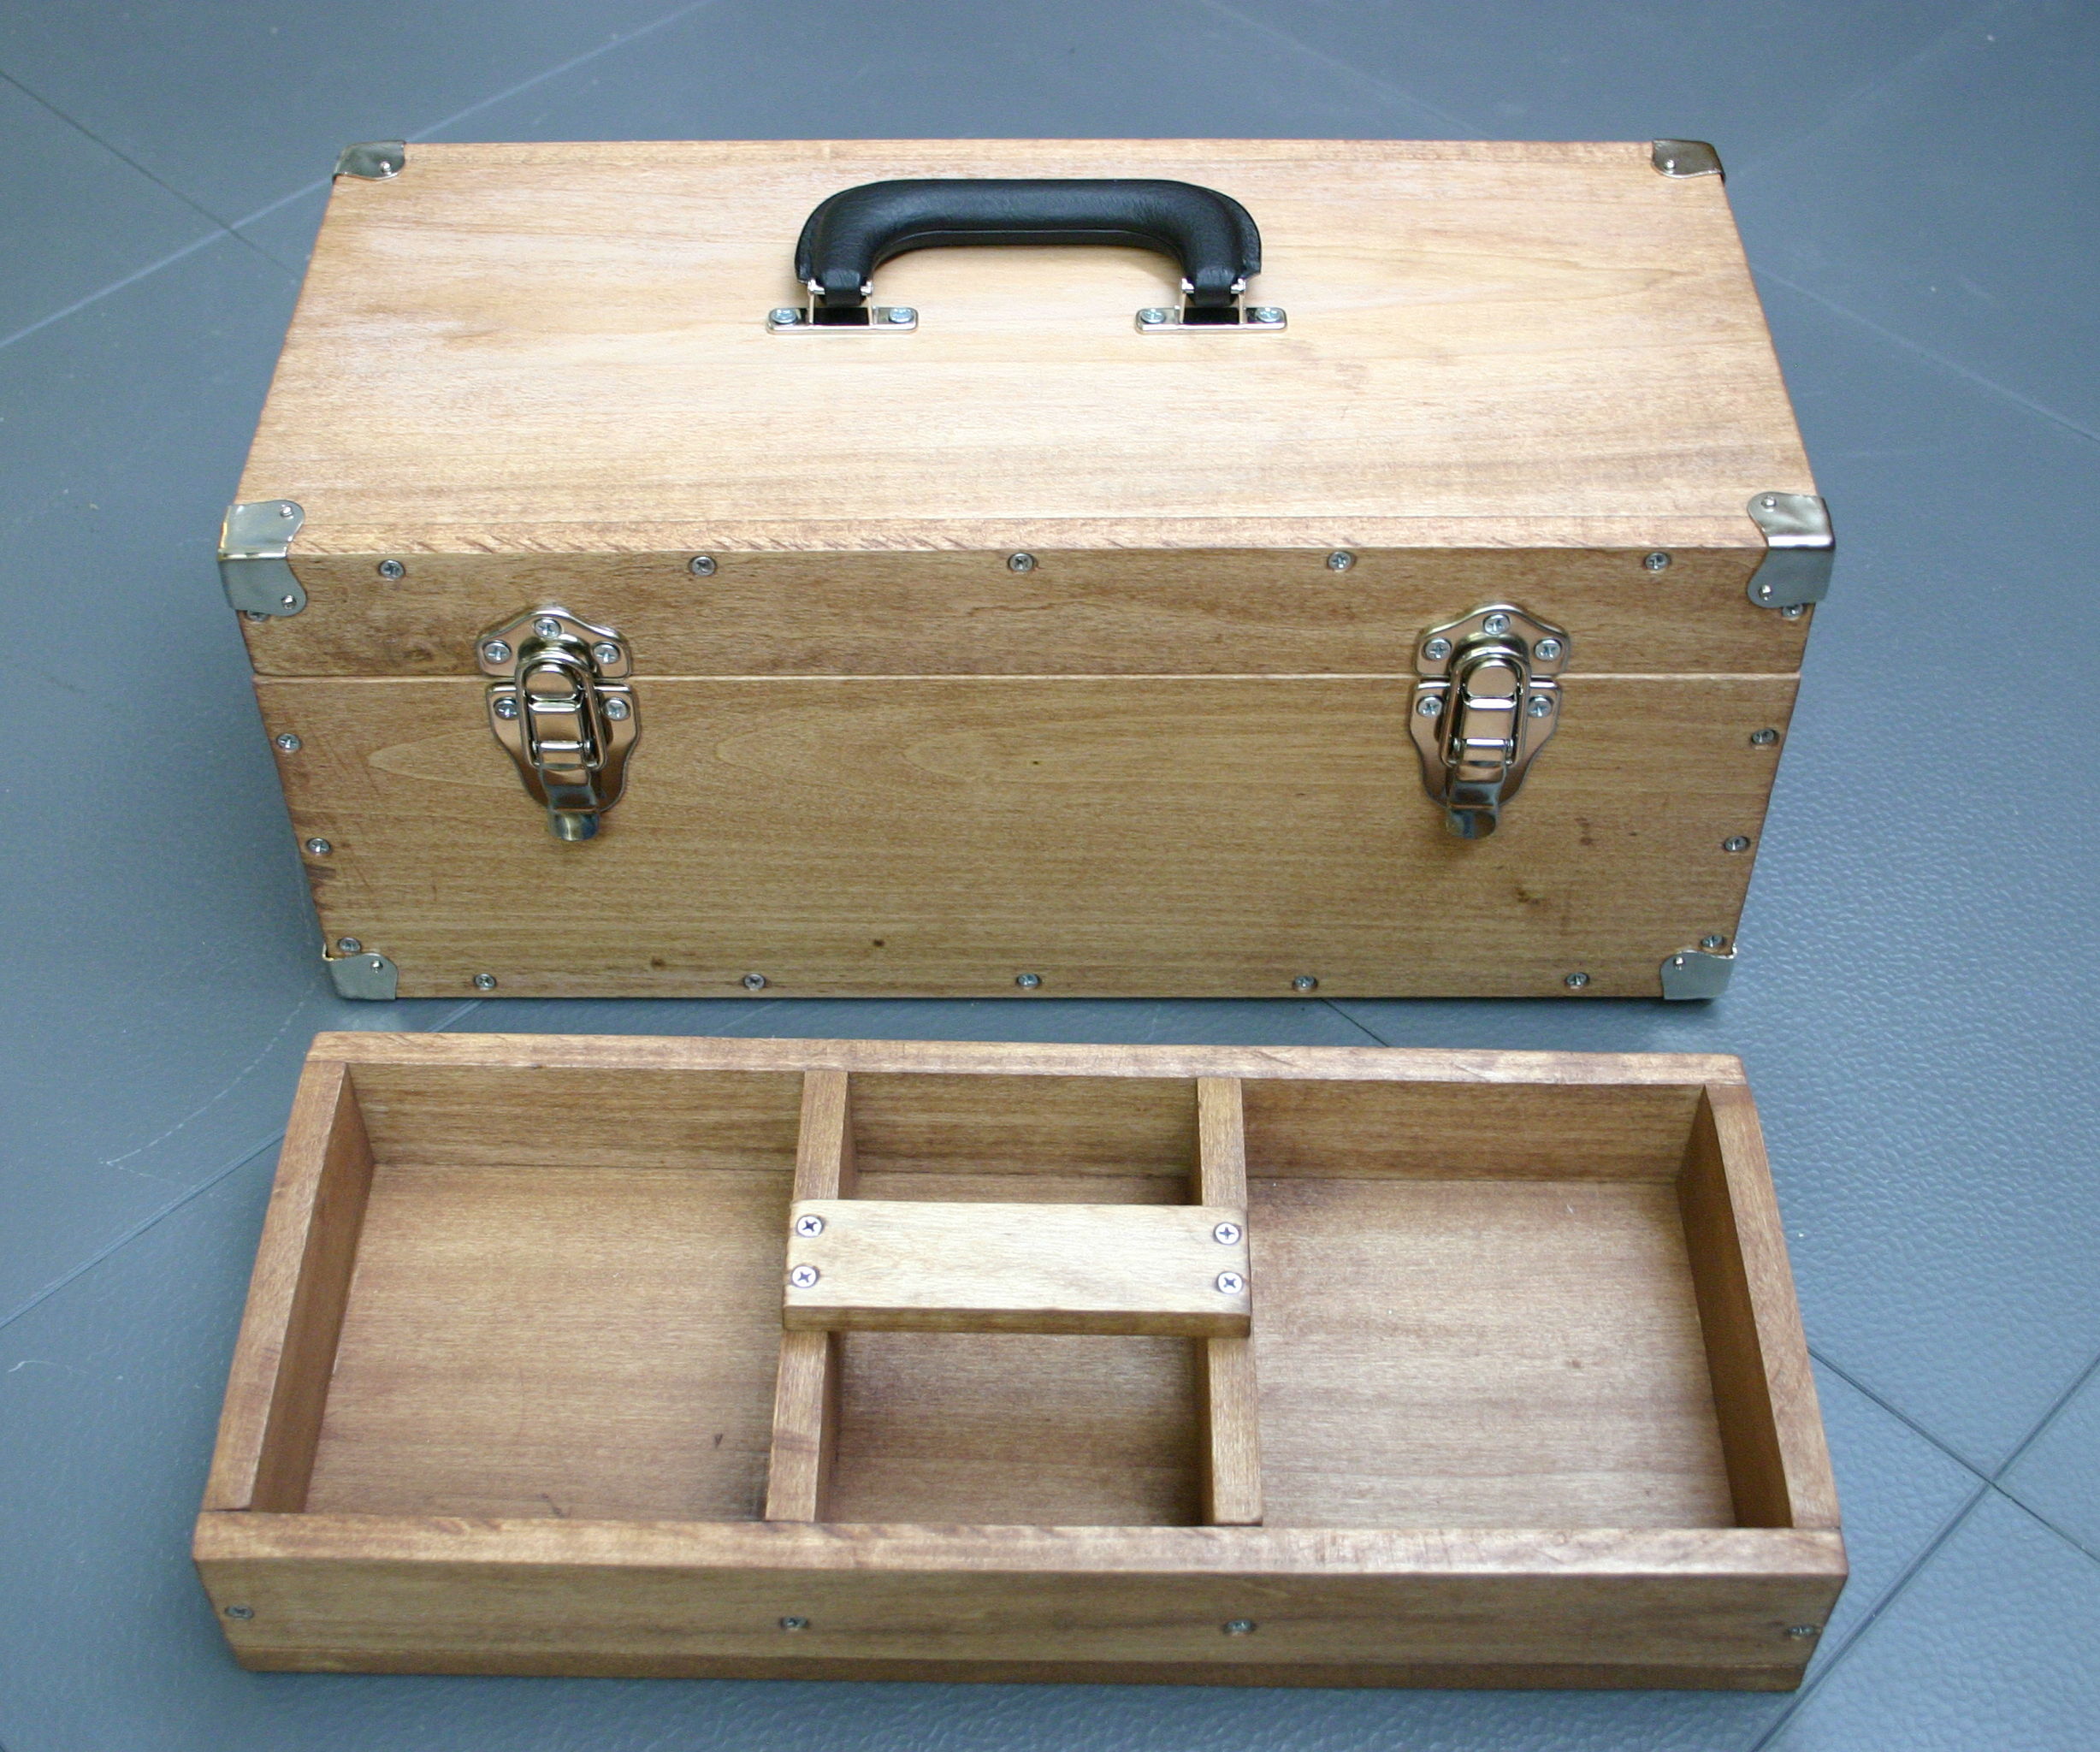 Functional and Sturdy Wooden Toolbox